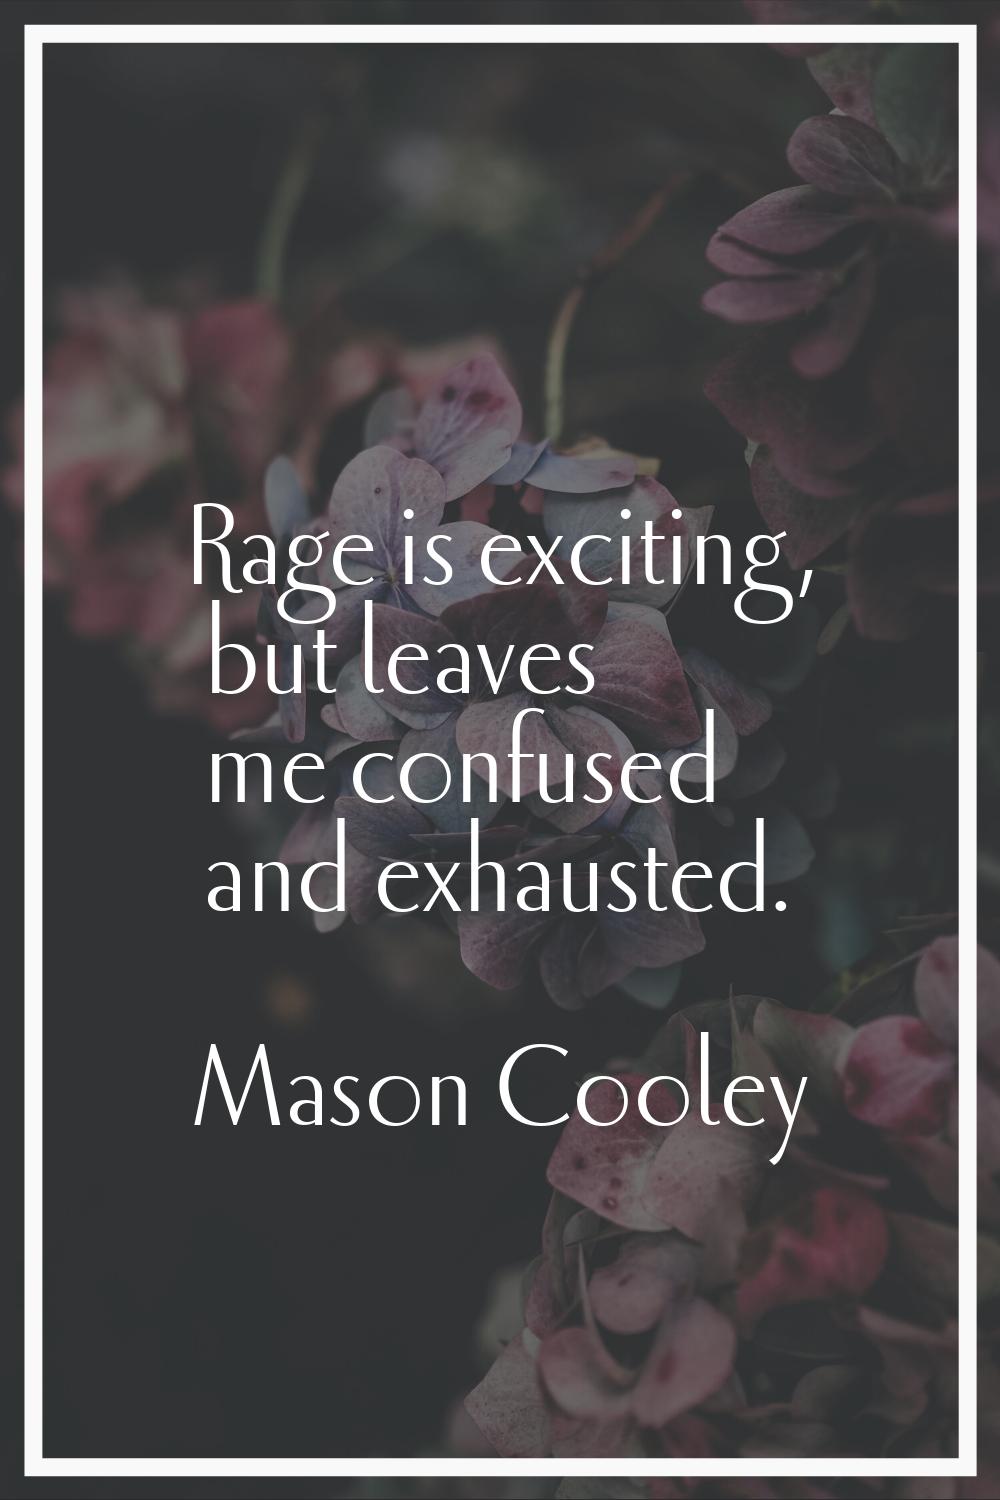 Rage is exciting, but leaves me confused and exhausted.